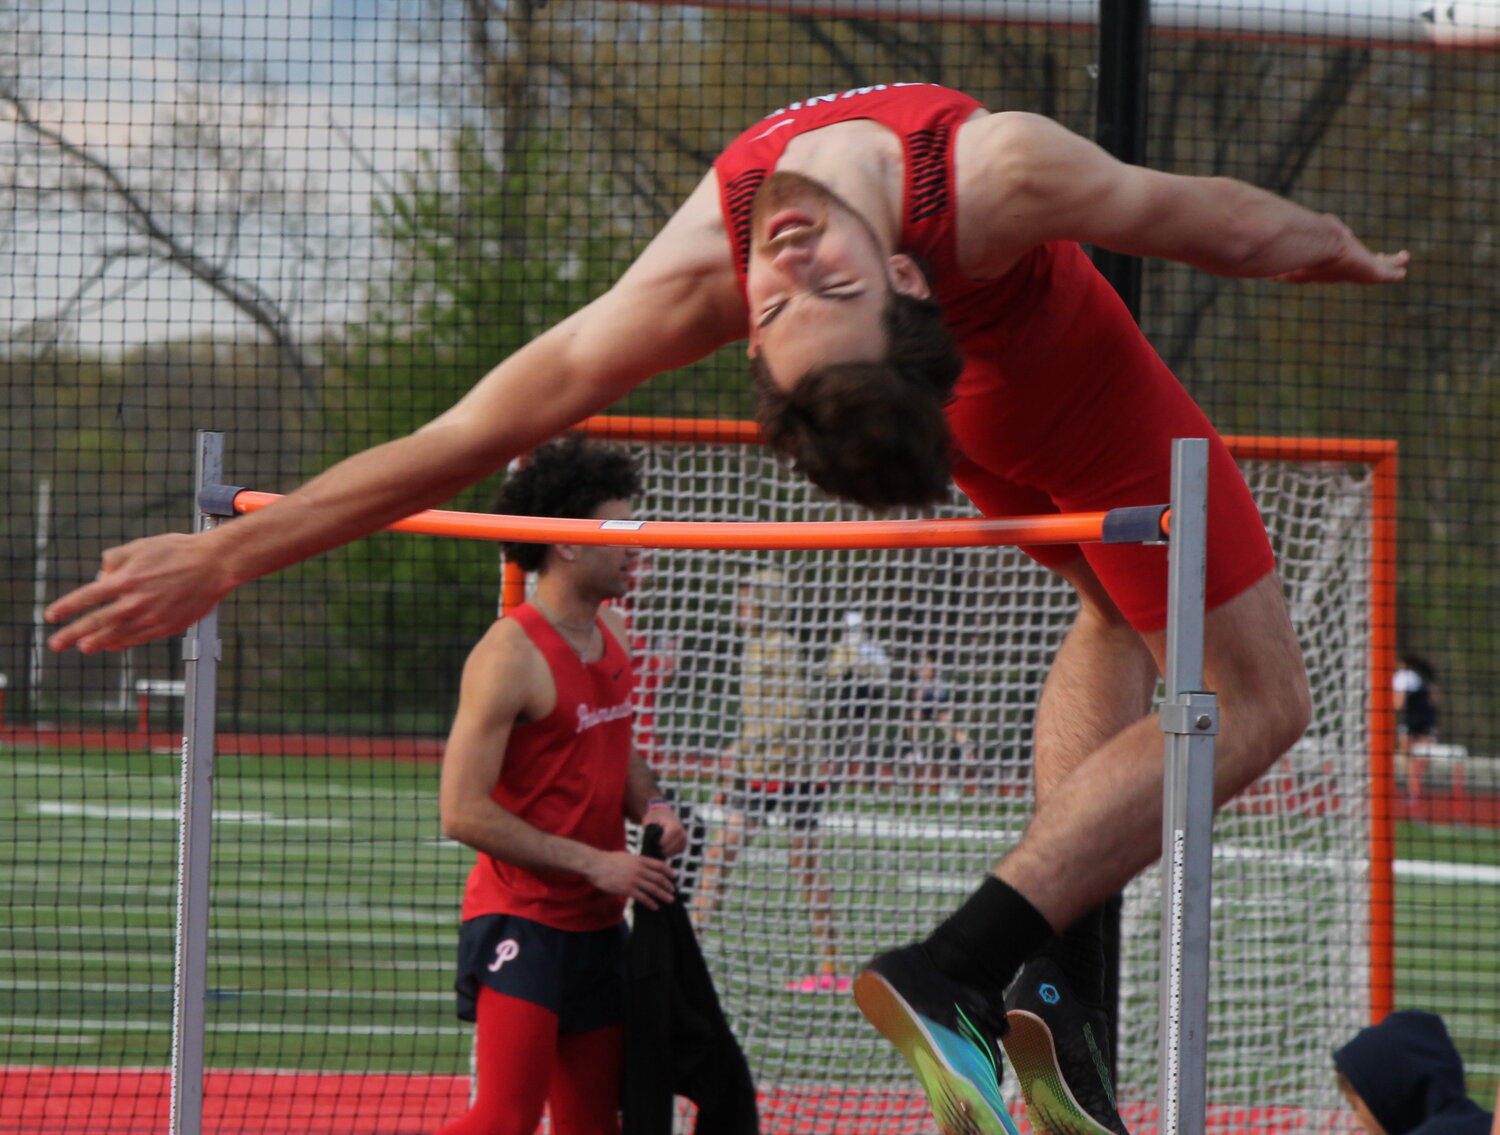 East Providence High School's Dylan Slavick competes in the high jump for the Townies in their Eastern Division outdoor track and field meet Monday, April 24.